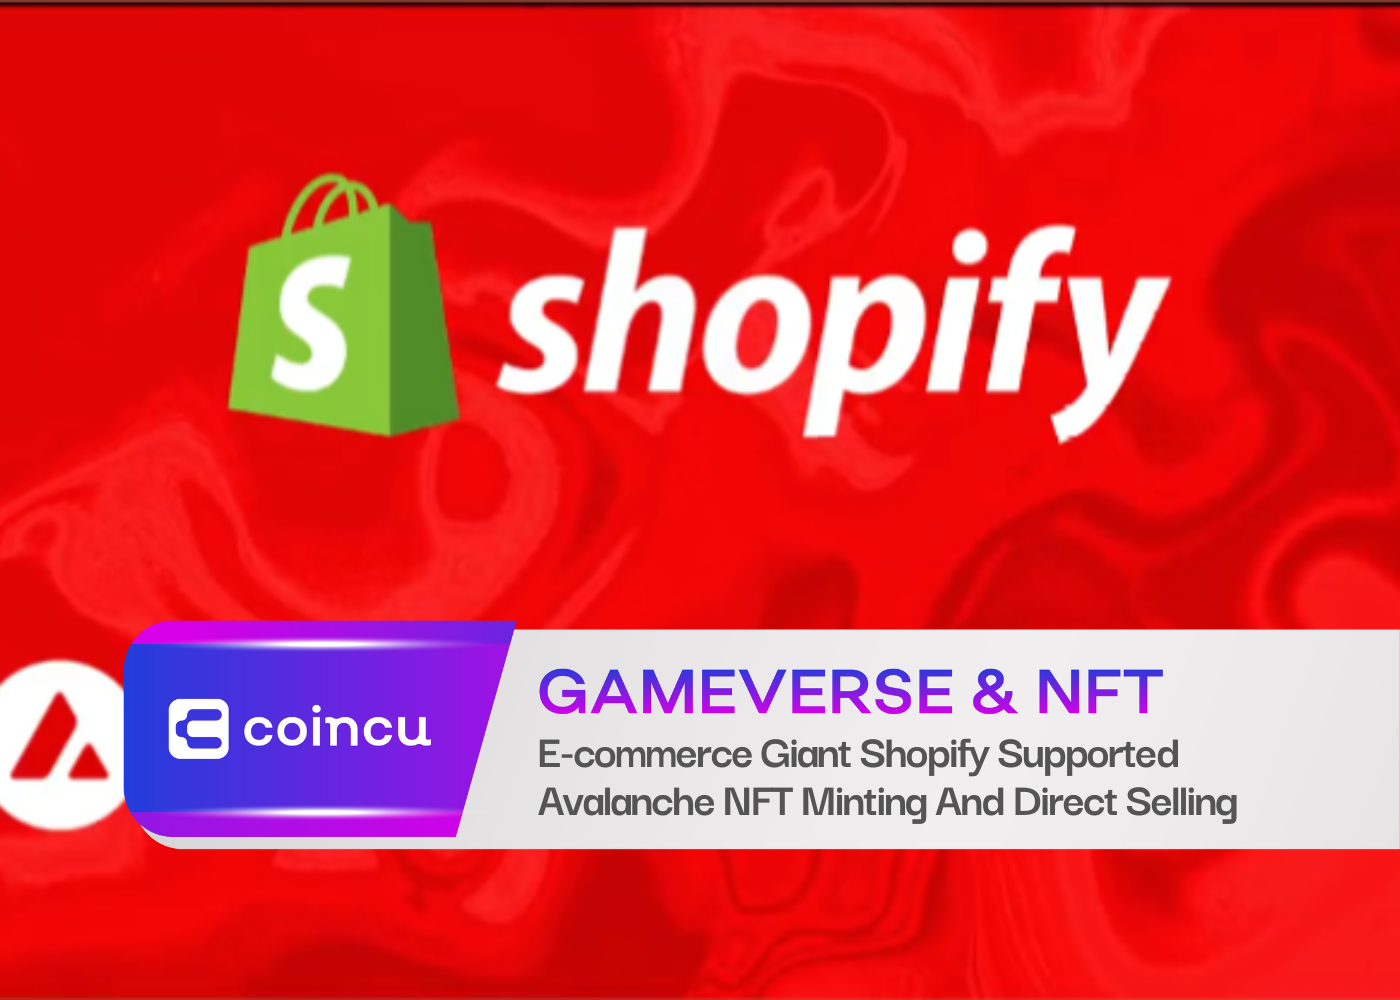 E-commerce Giant Shopify Supported Avalanche NFT Minting And Direct Selling